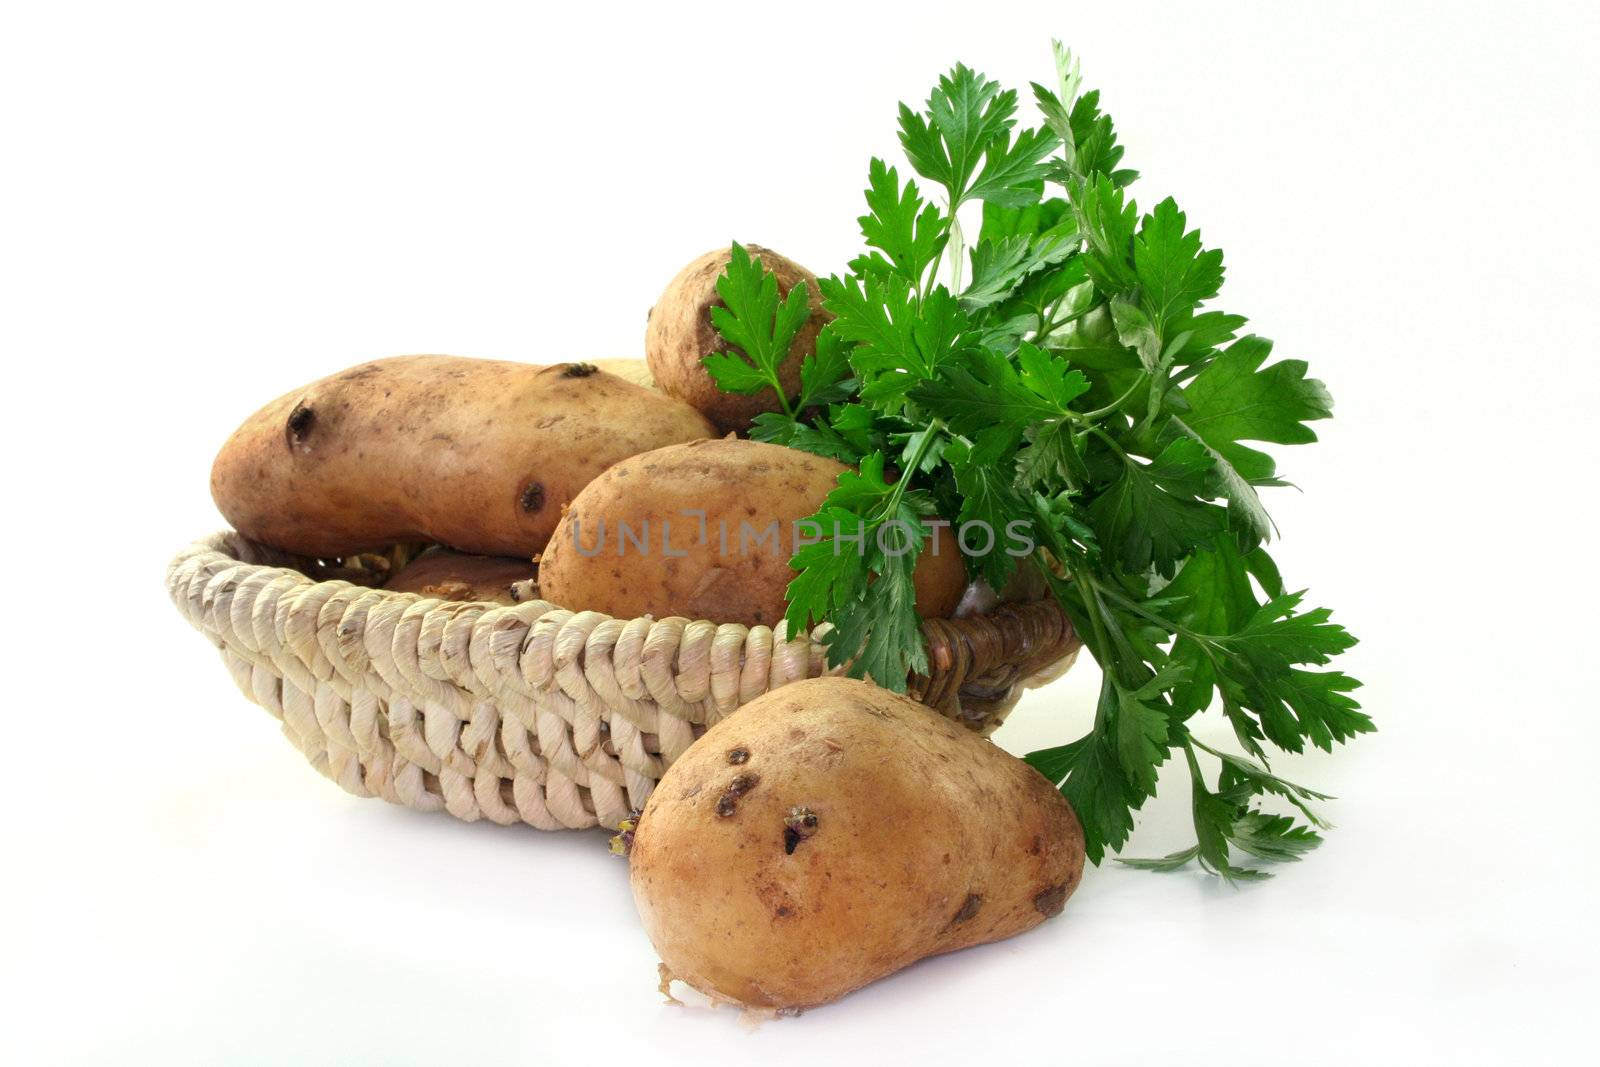 fresh potatoes in a basket on a white background